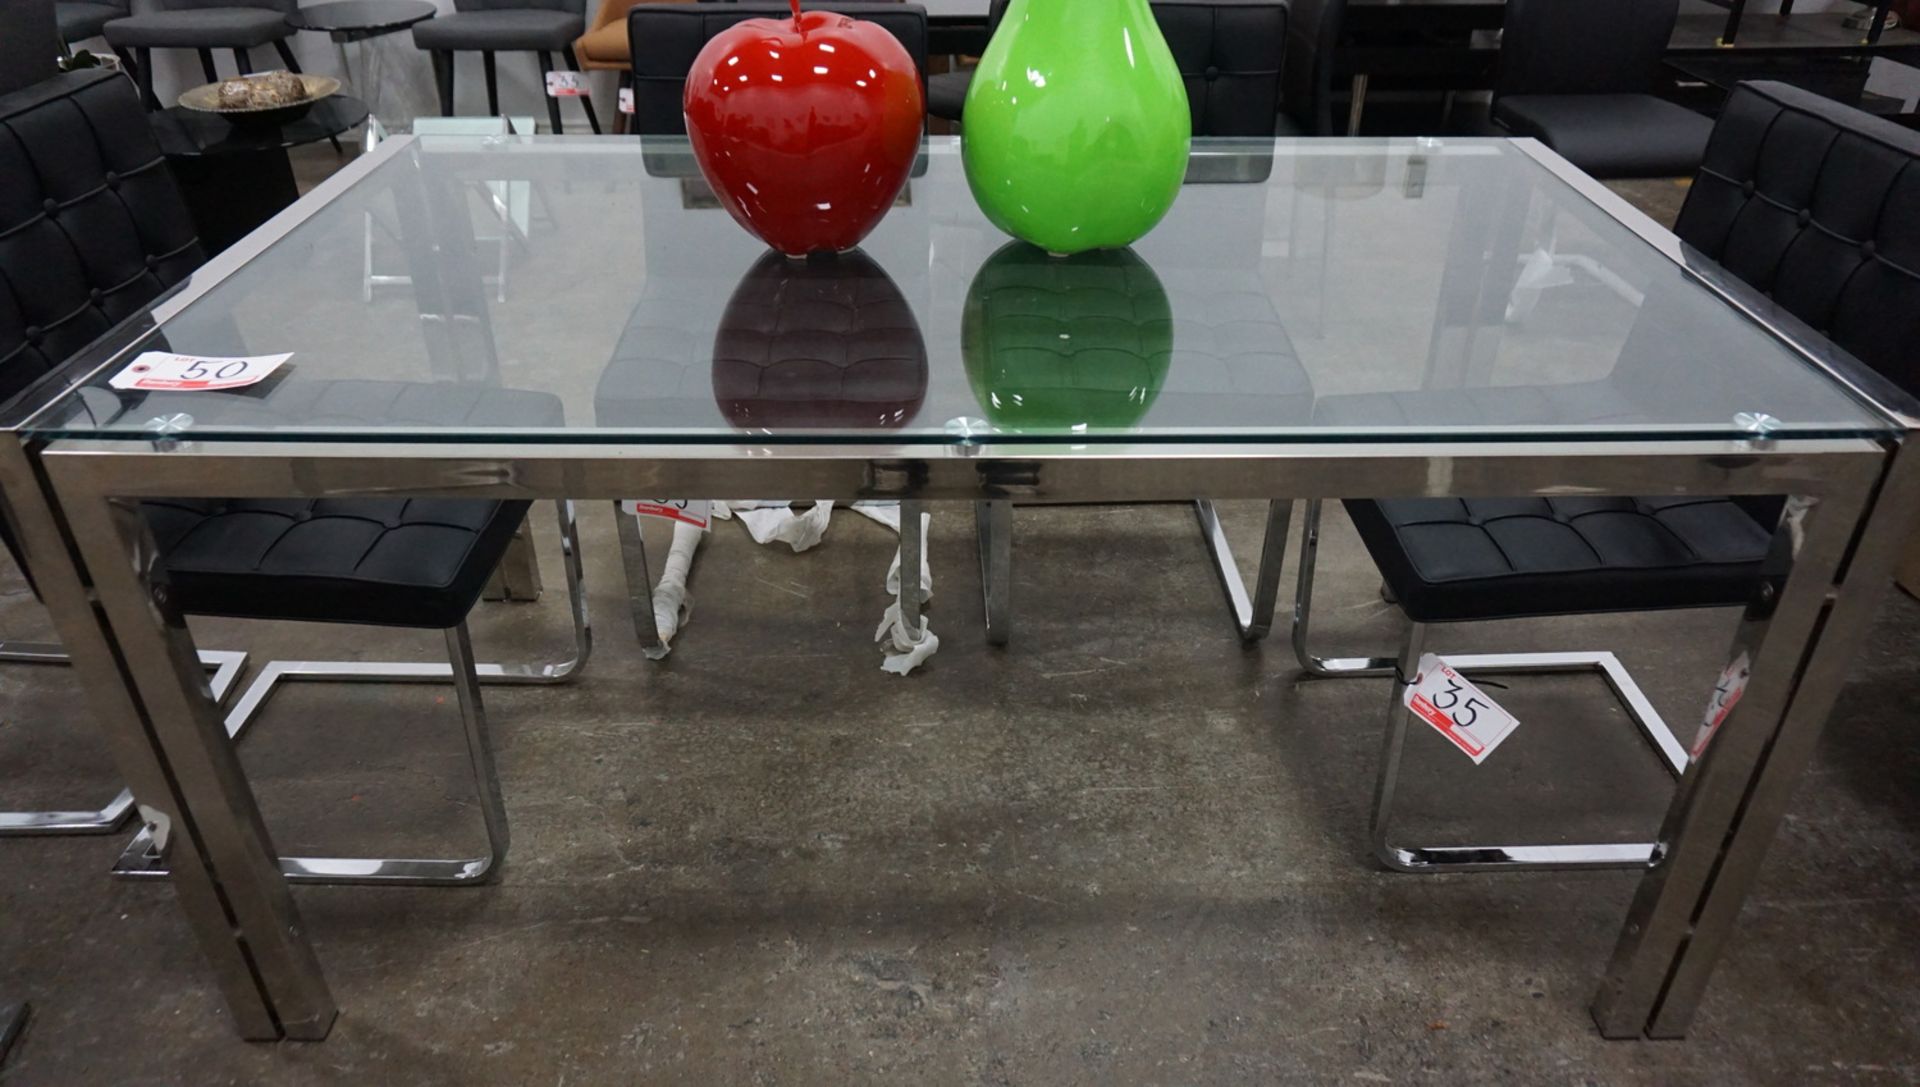 CLEAR 63" X 35.5" X 29.5" TEMPERED GLASS DINING TABLE W/ CHROME LEGS